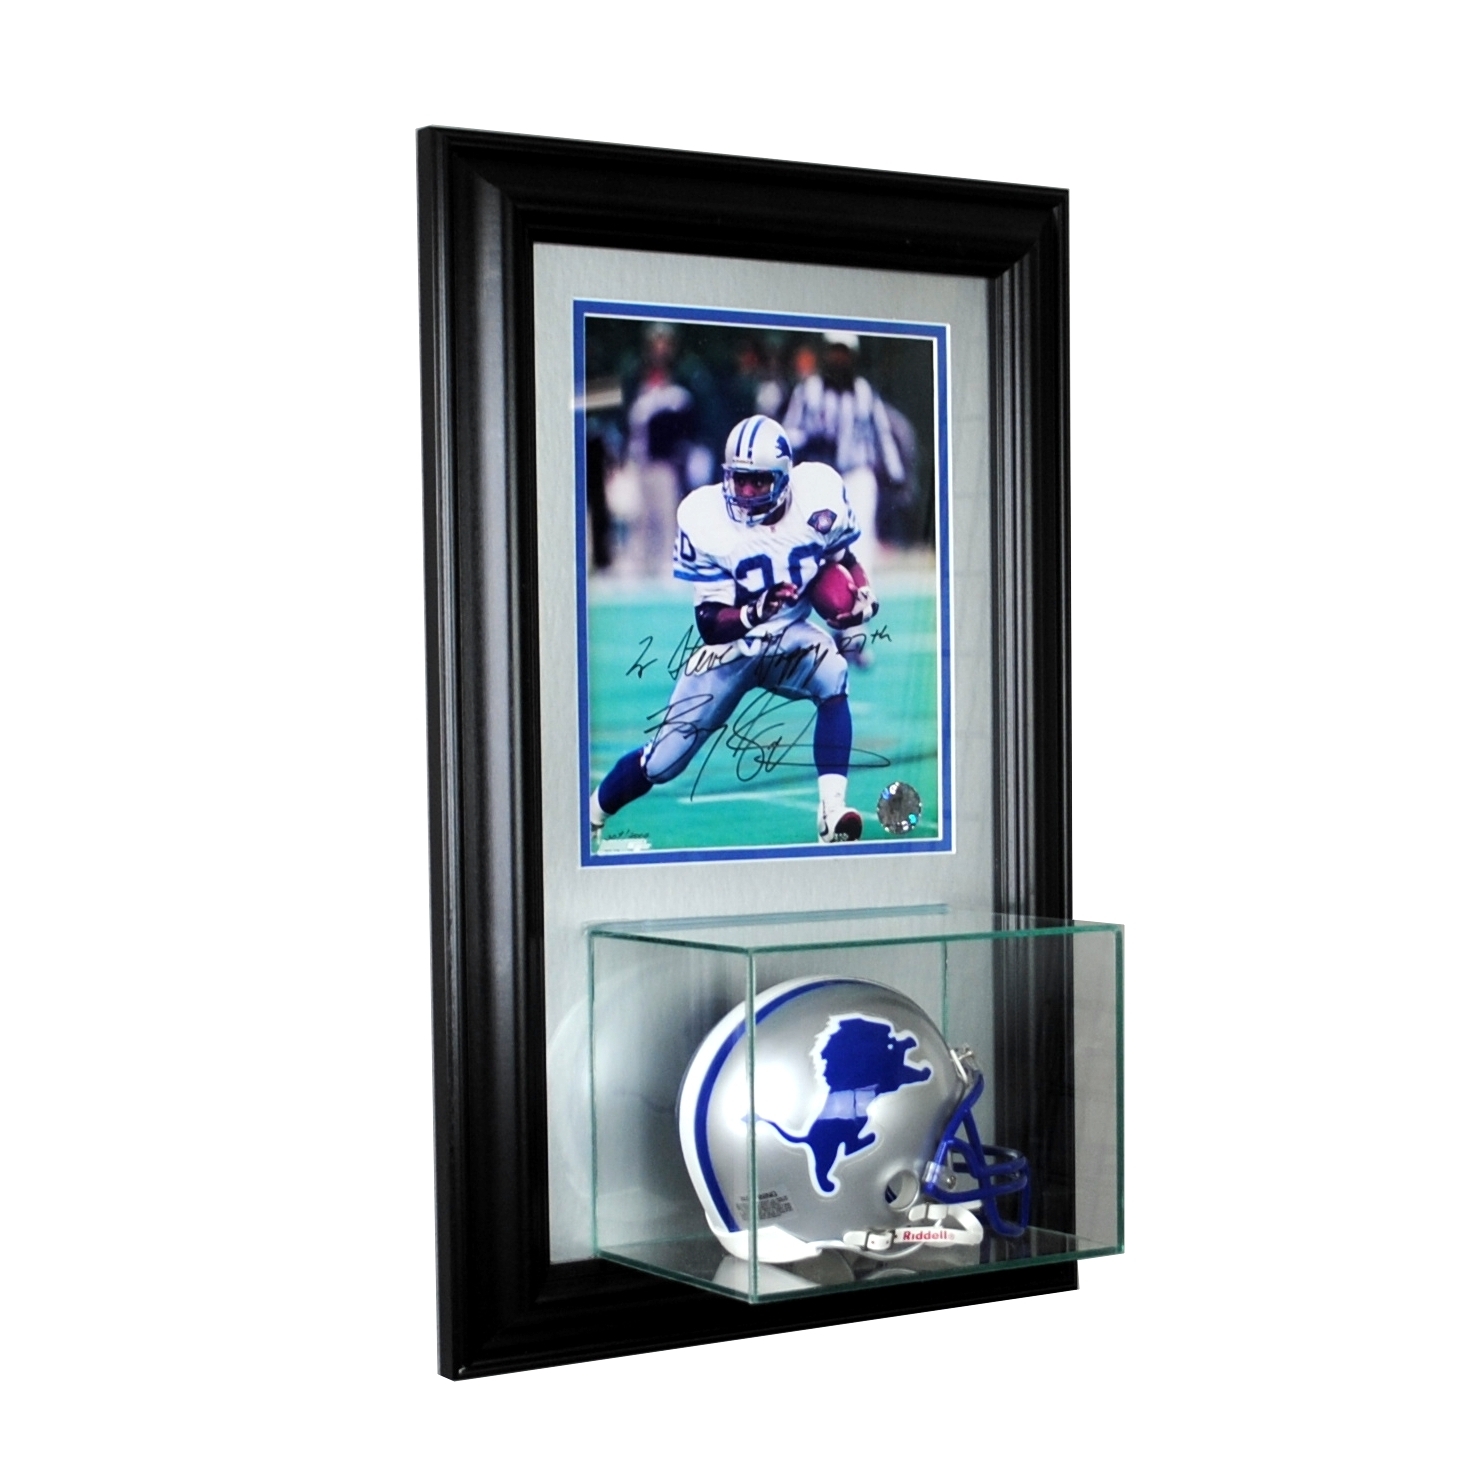 Display Cases with 8 x 10 Photo